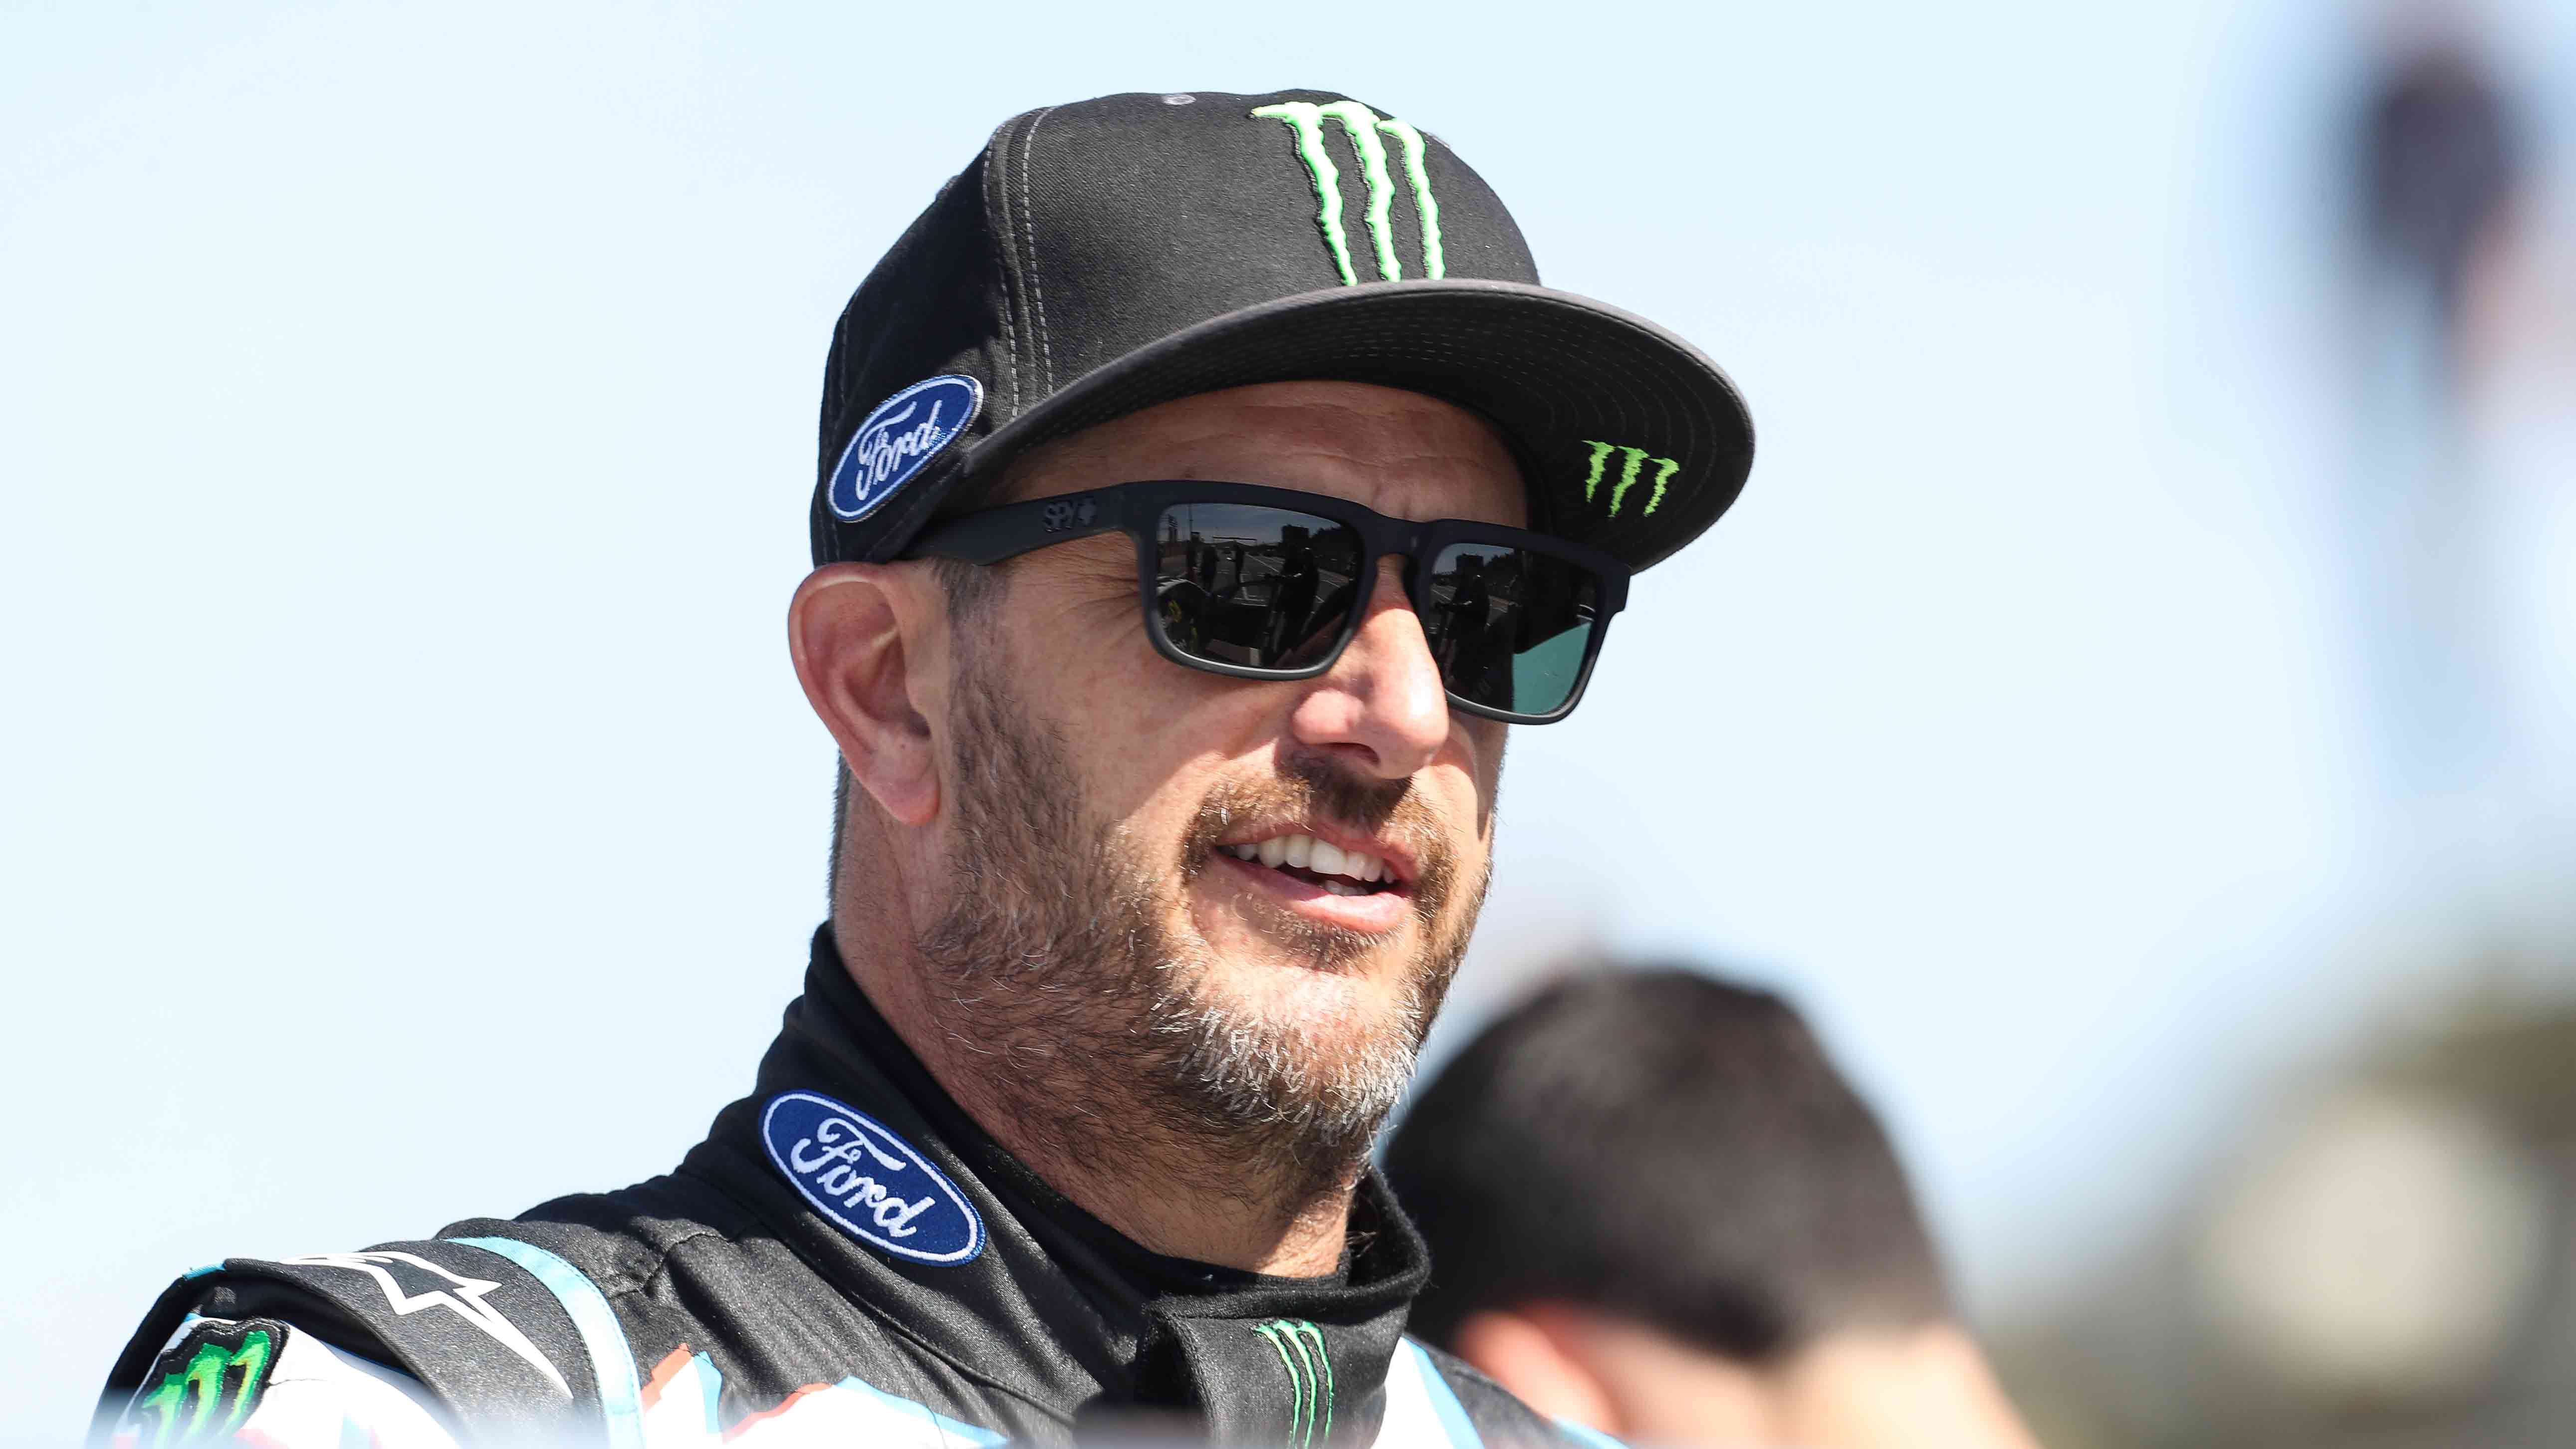 Ken Block Enjoyed 'Great' Christmas Trip With Family Before Death